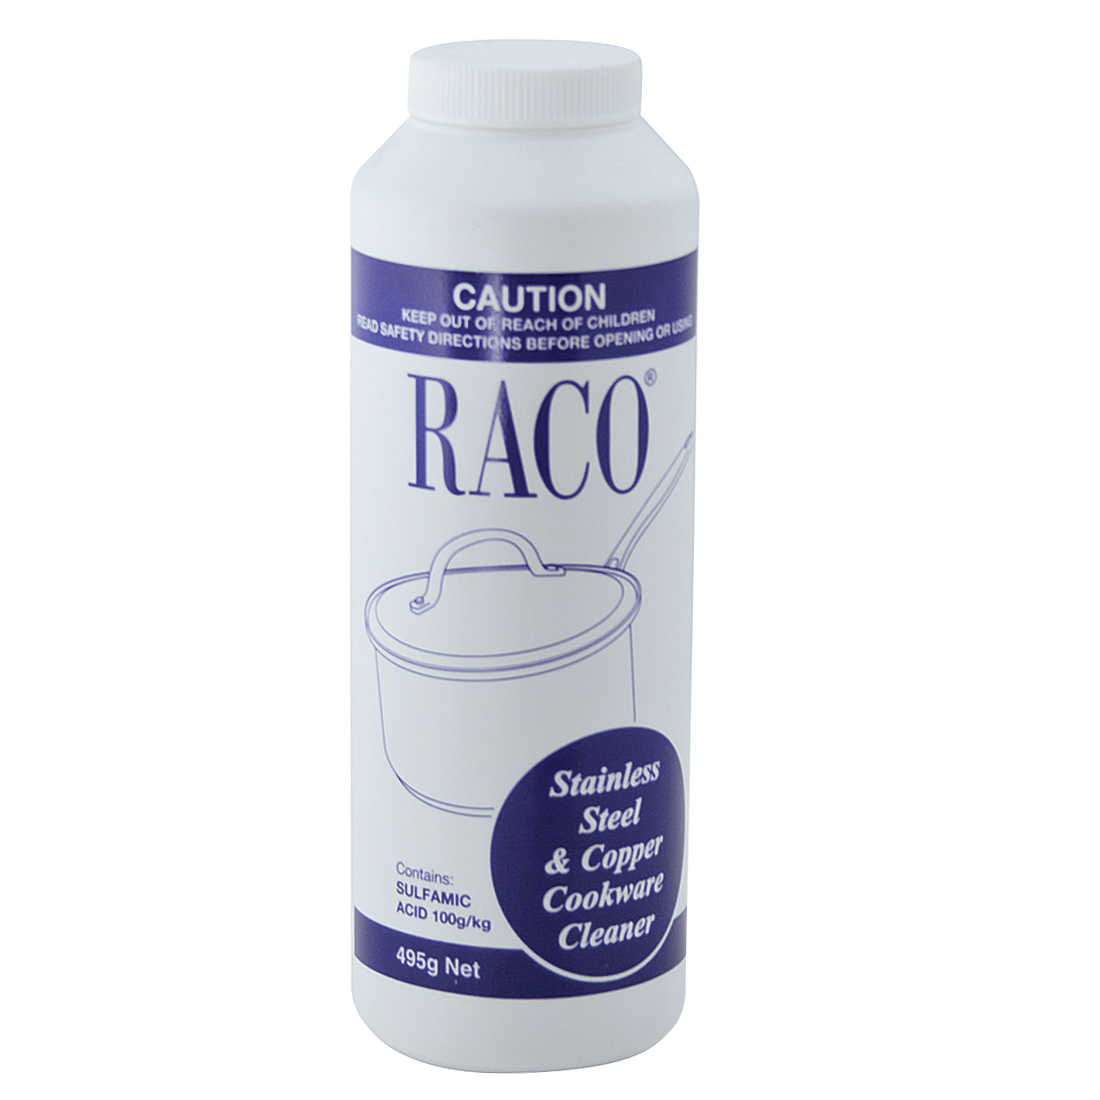 RACO Stainless Steel Powder Cleaner 495g